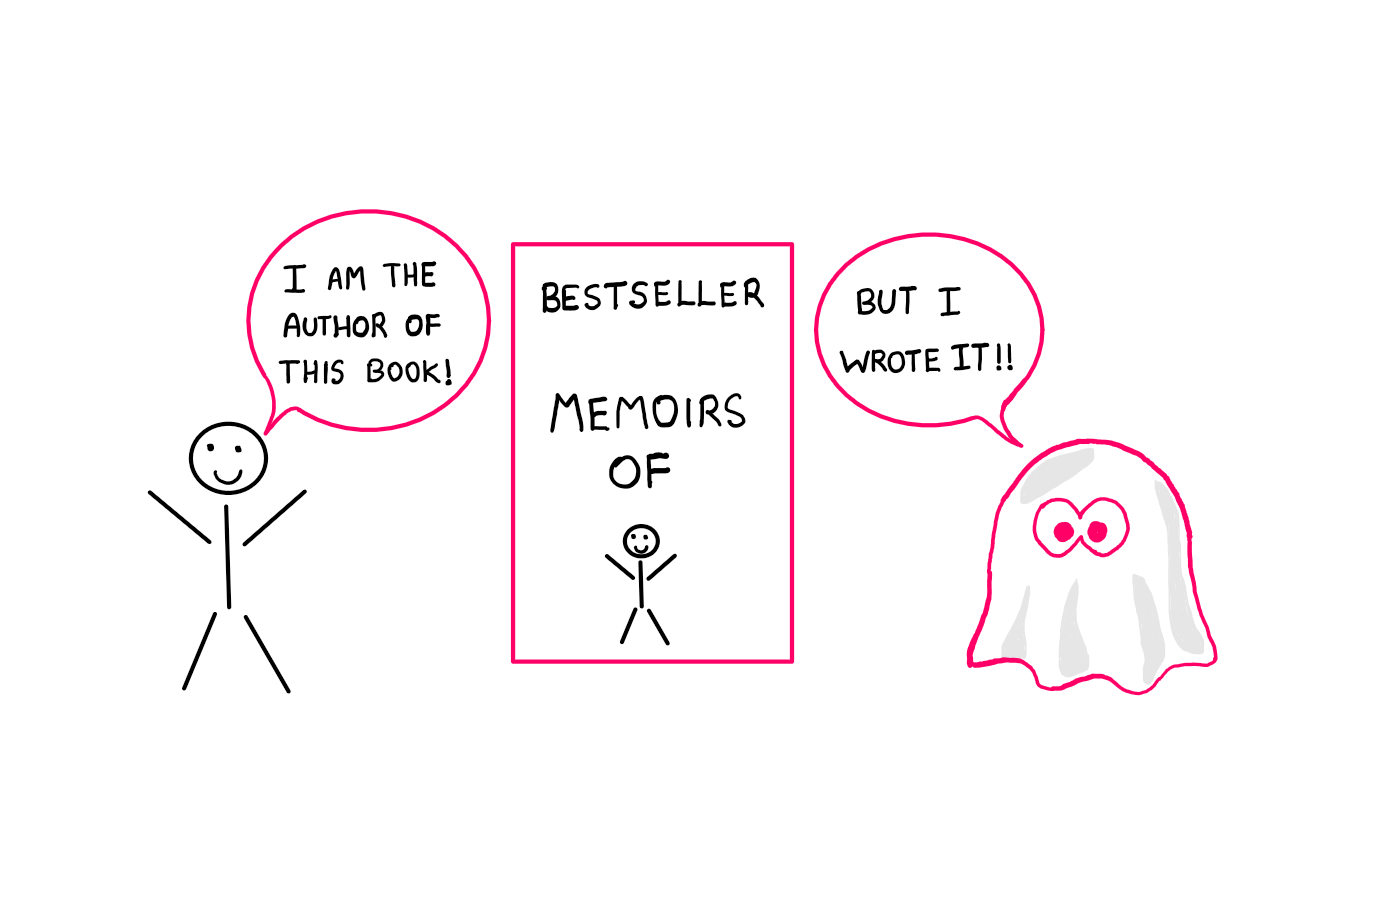 The Ghostwriter Problem: Is There Really No End To It? - An illustration showing a stick figure on the left and a bestselling book presented in the middle. The book appears to be a "Memoirs of the stick figure." The stick figure says, "I am the author of this book." However, there is a cute-looking ghost on the right-hand side. The cute ghost says, "But I wrote it!"